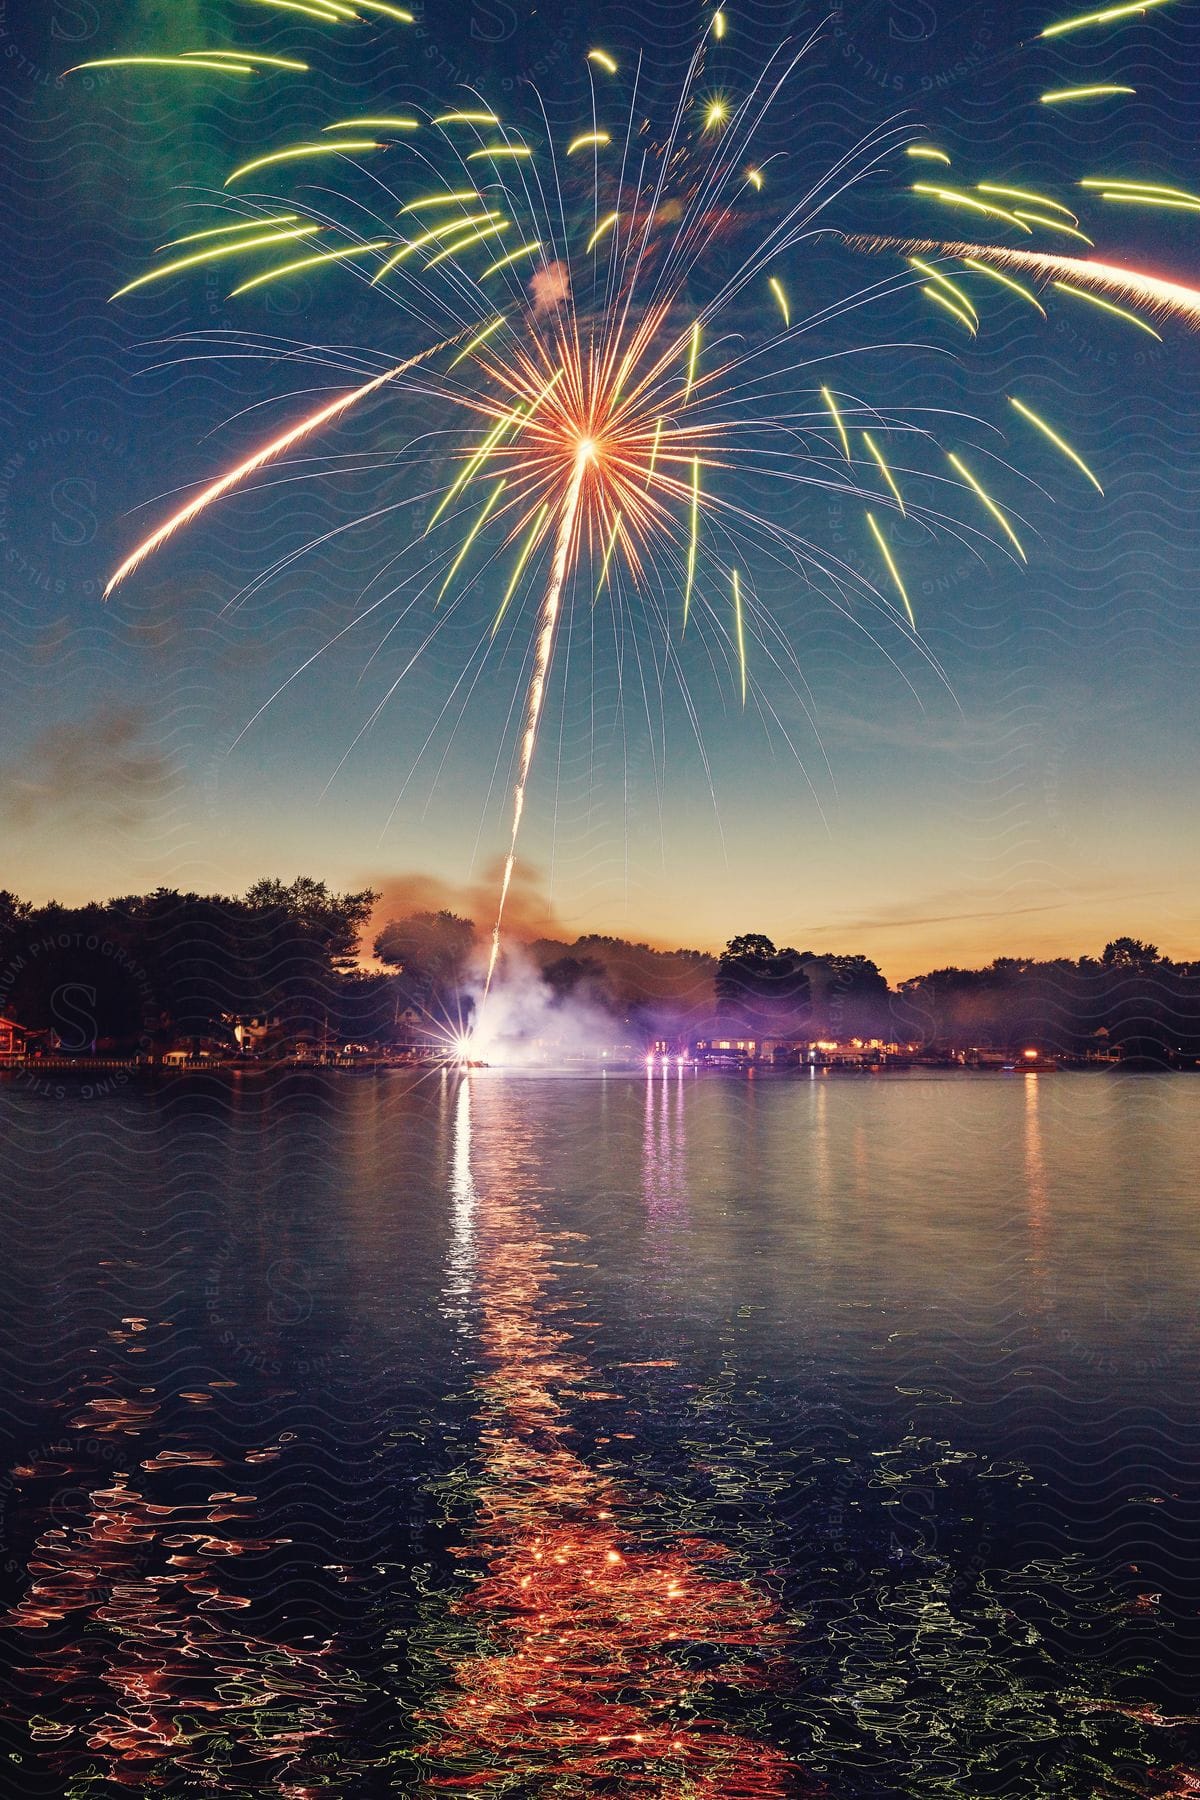 Fireworks explode over the water at night as lights reflect colors on the surface